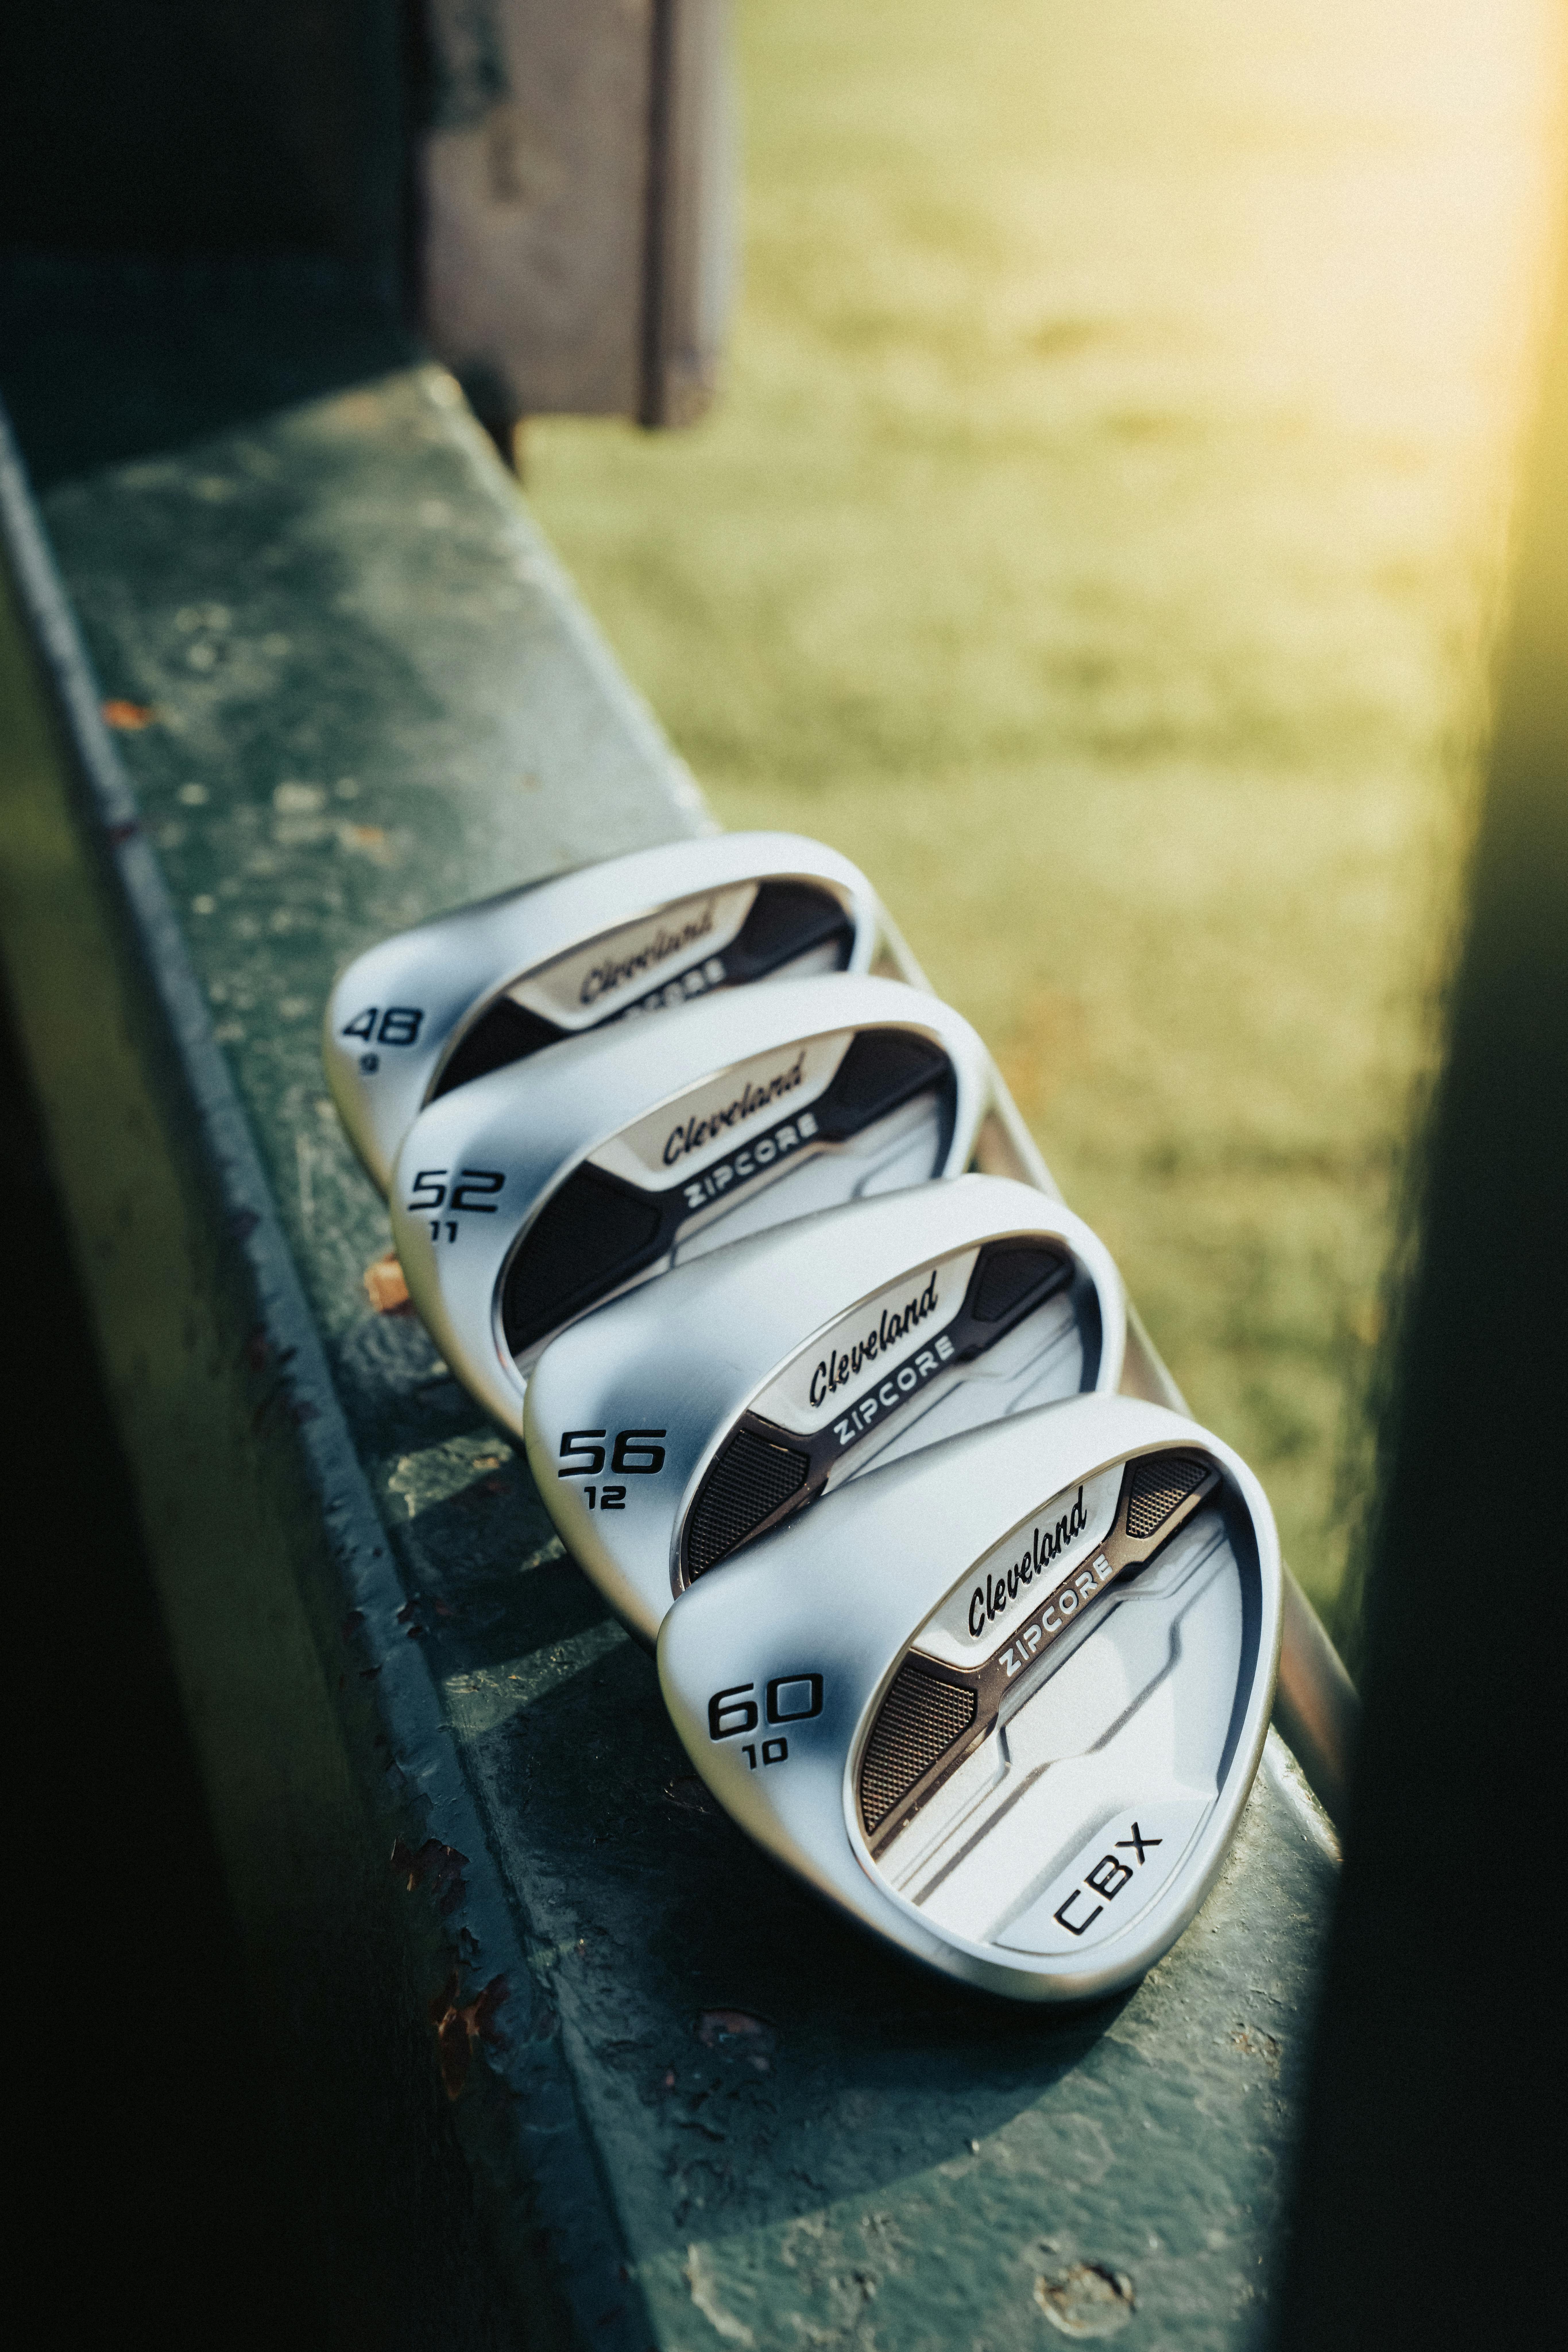 Cleveland CBX Zipcore Wedge · Right handed · Graphite · 56° · 12° · Chrome